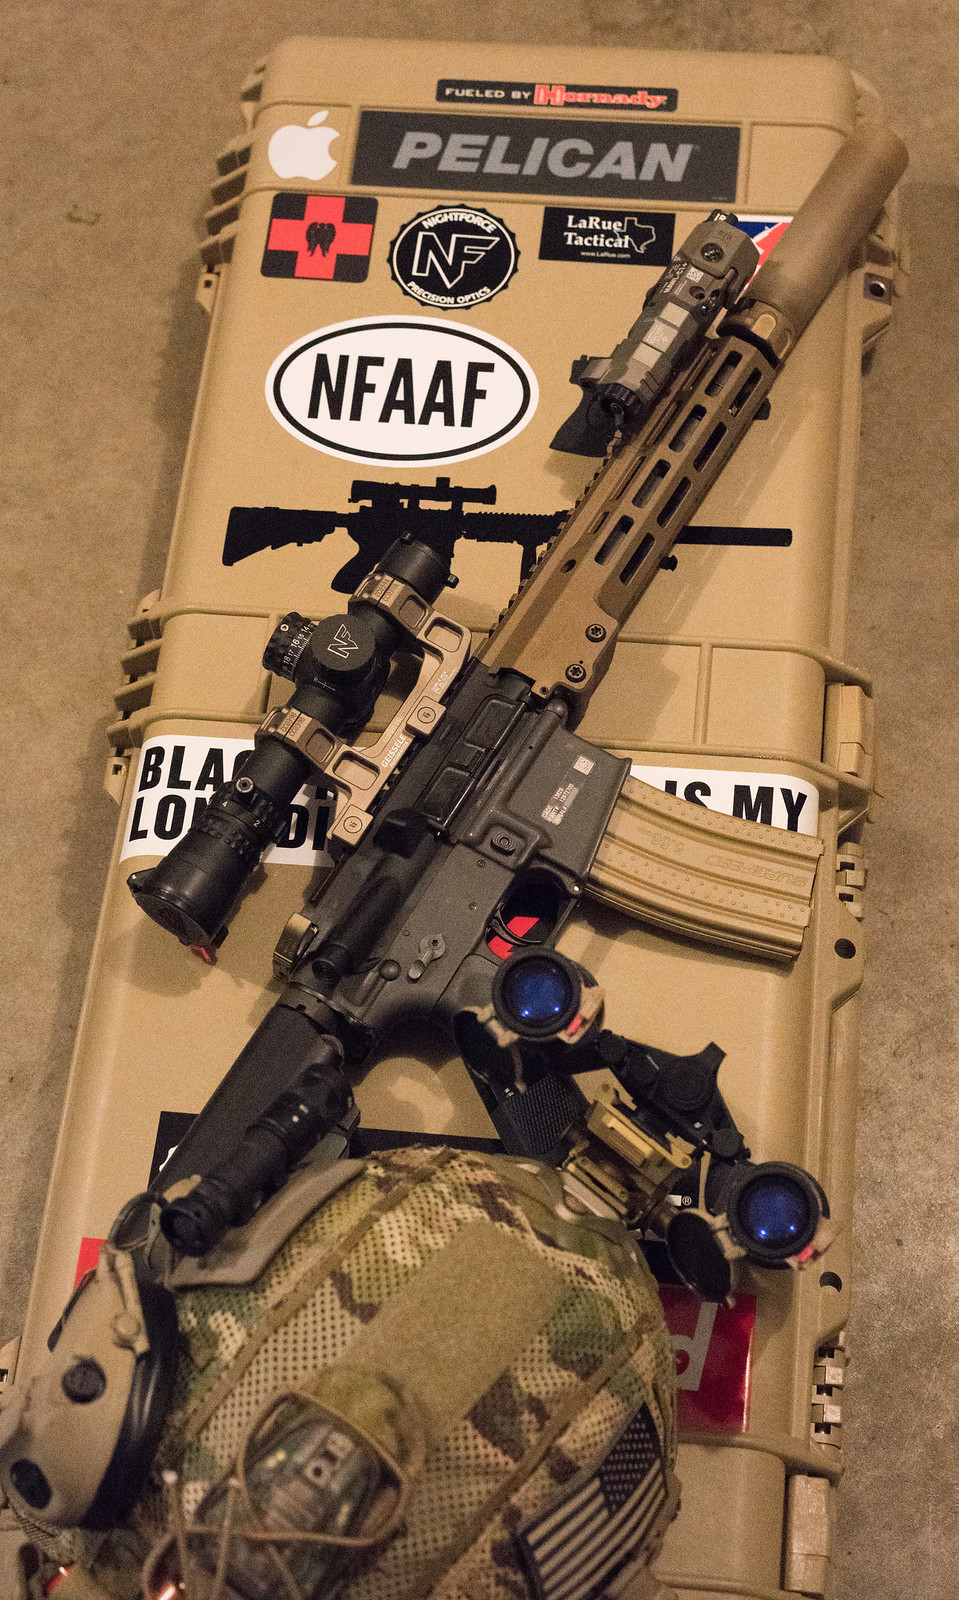 Official Geissele MK16 Picture Thread - Page 4 - AR15.COM